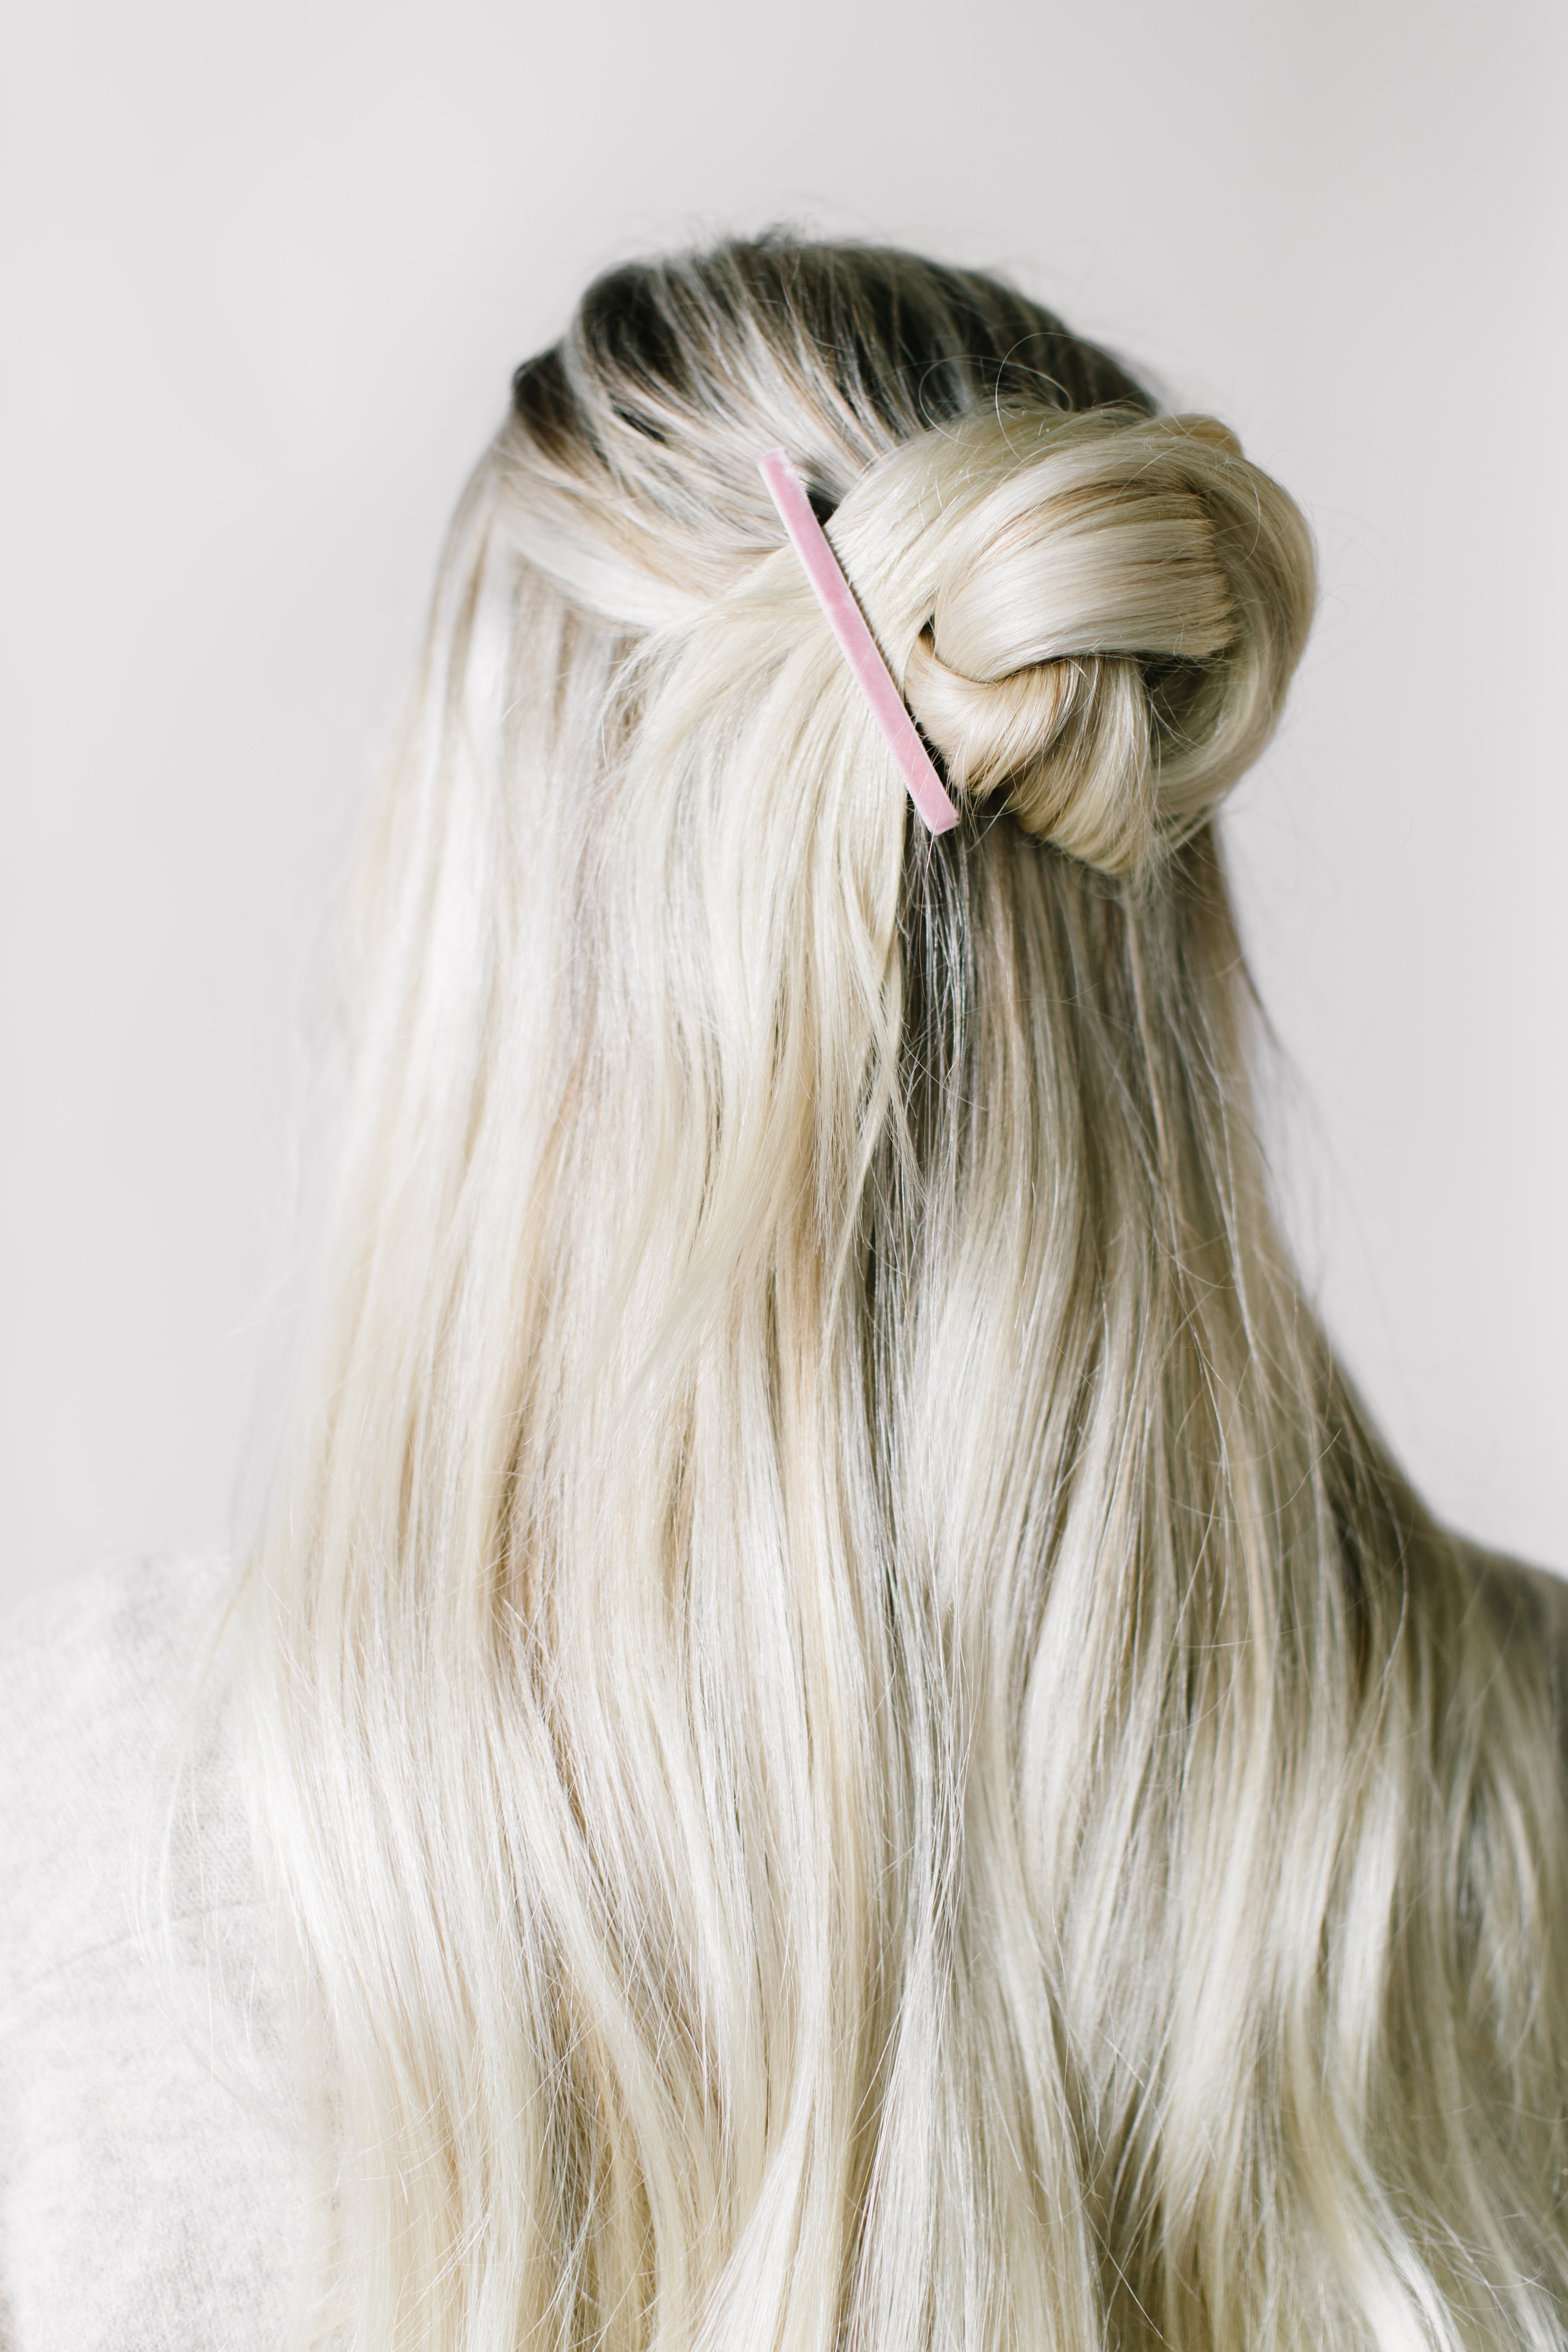 TWO MINUTE TUTORIAL: Half Knot with Barrette